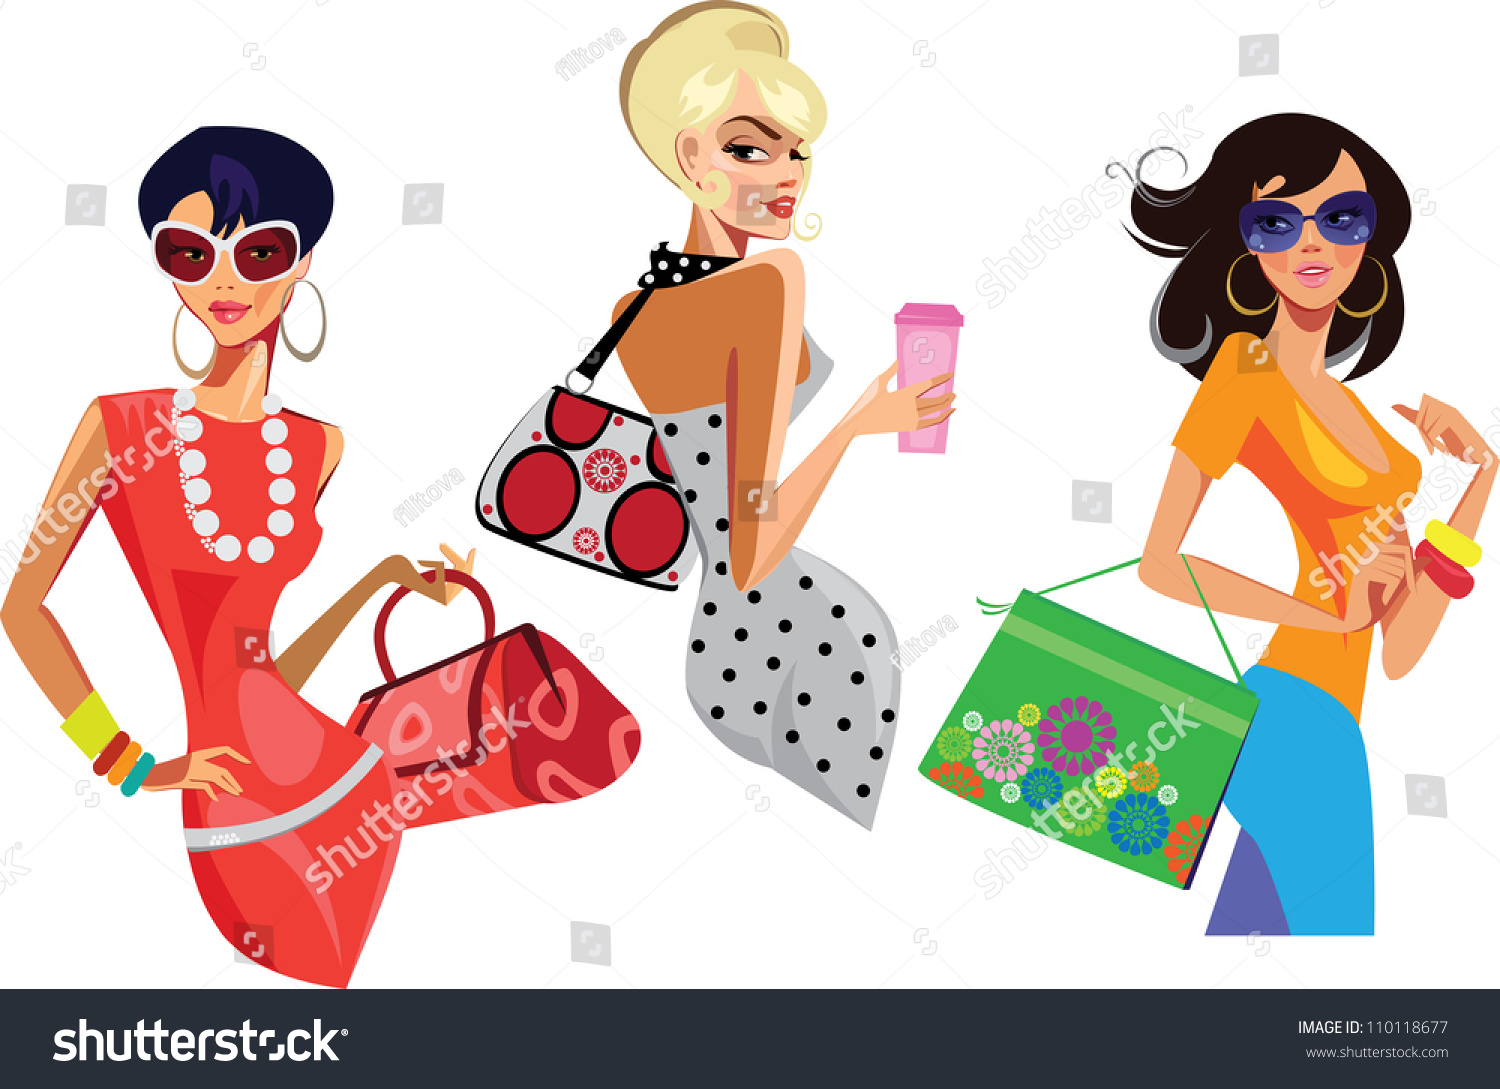 clipart of ladies clothes - photo #32